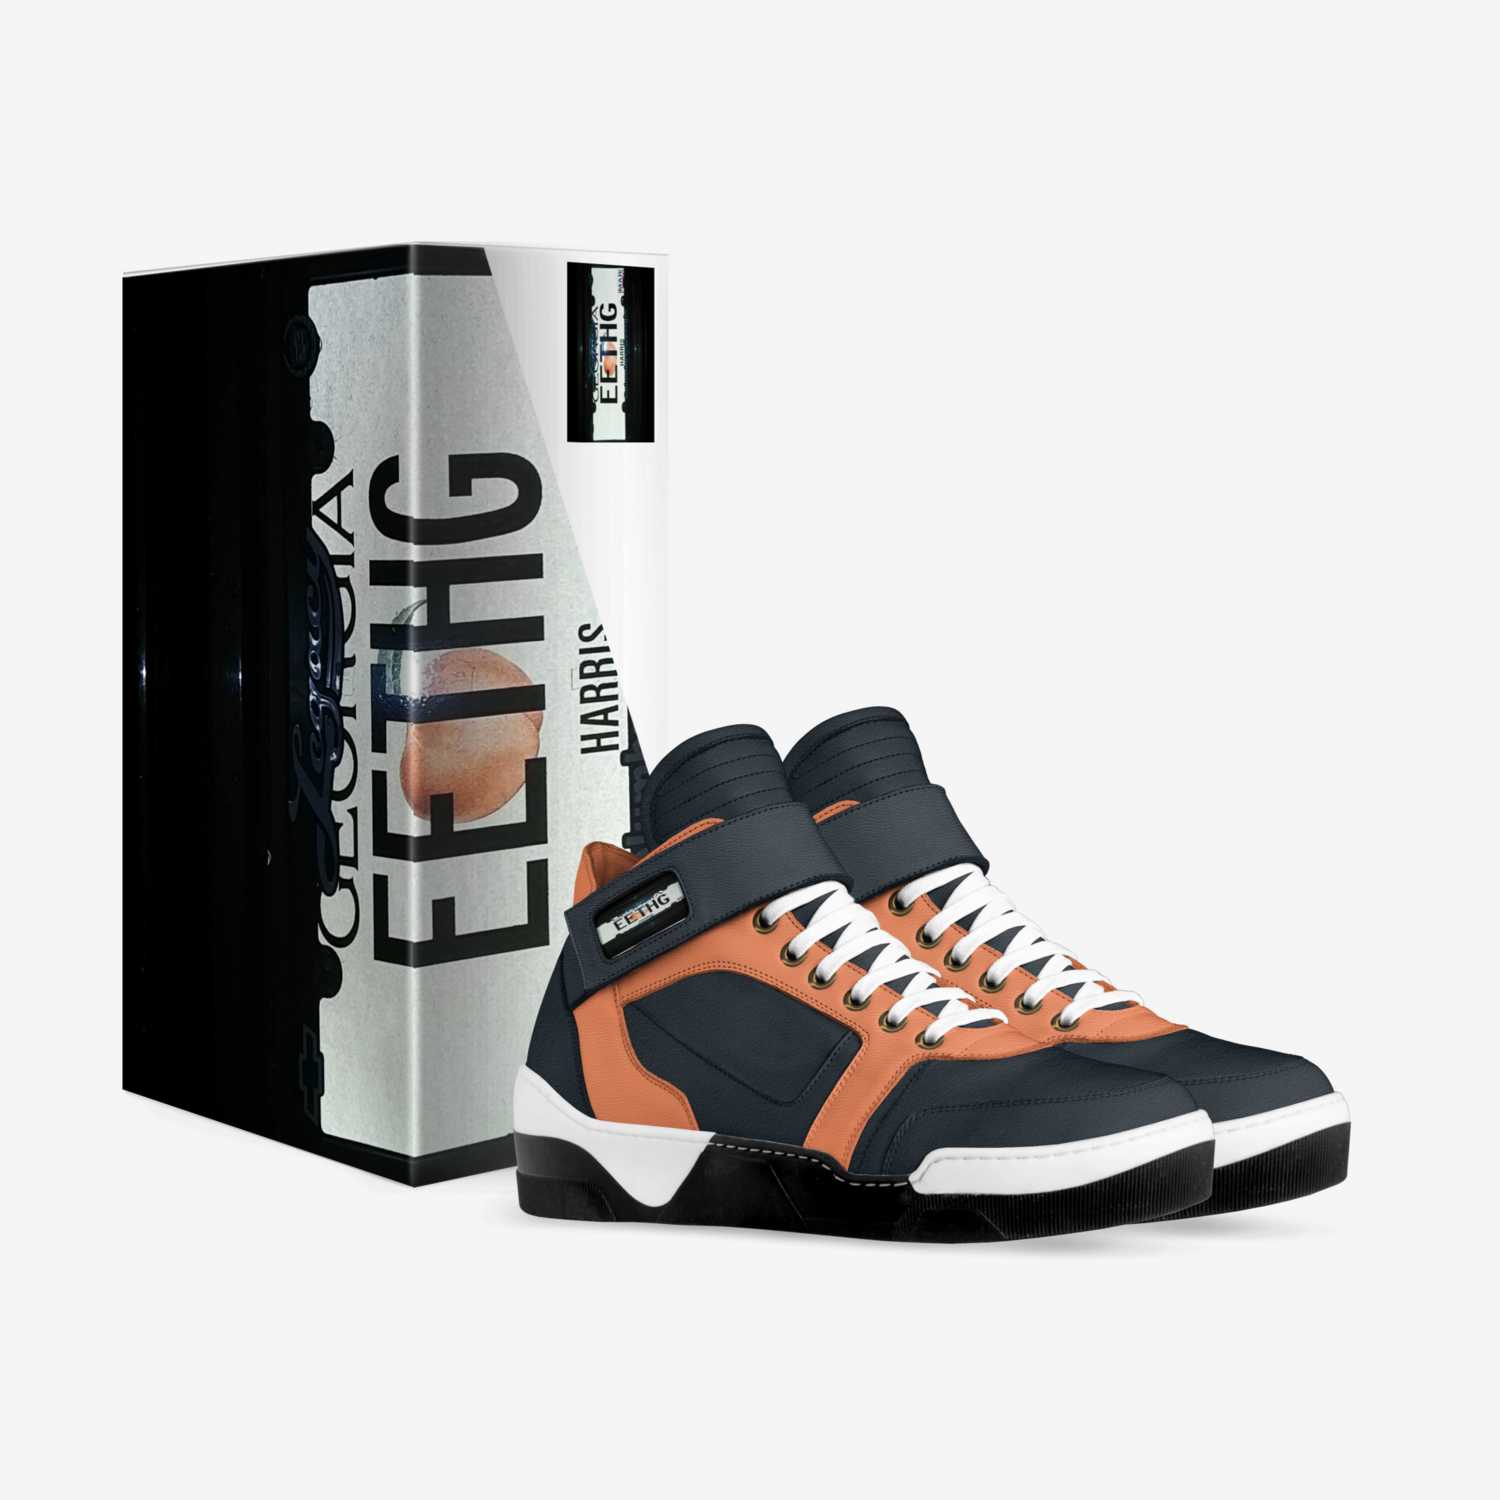 eethg custom made in Italy shoes by Terrence Herschel Gay | Box view